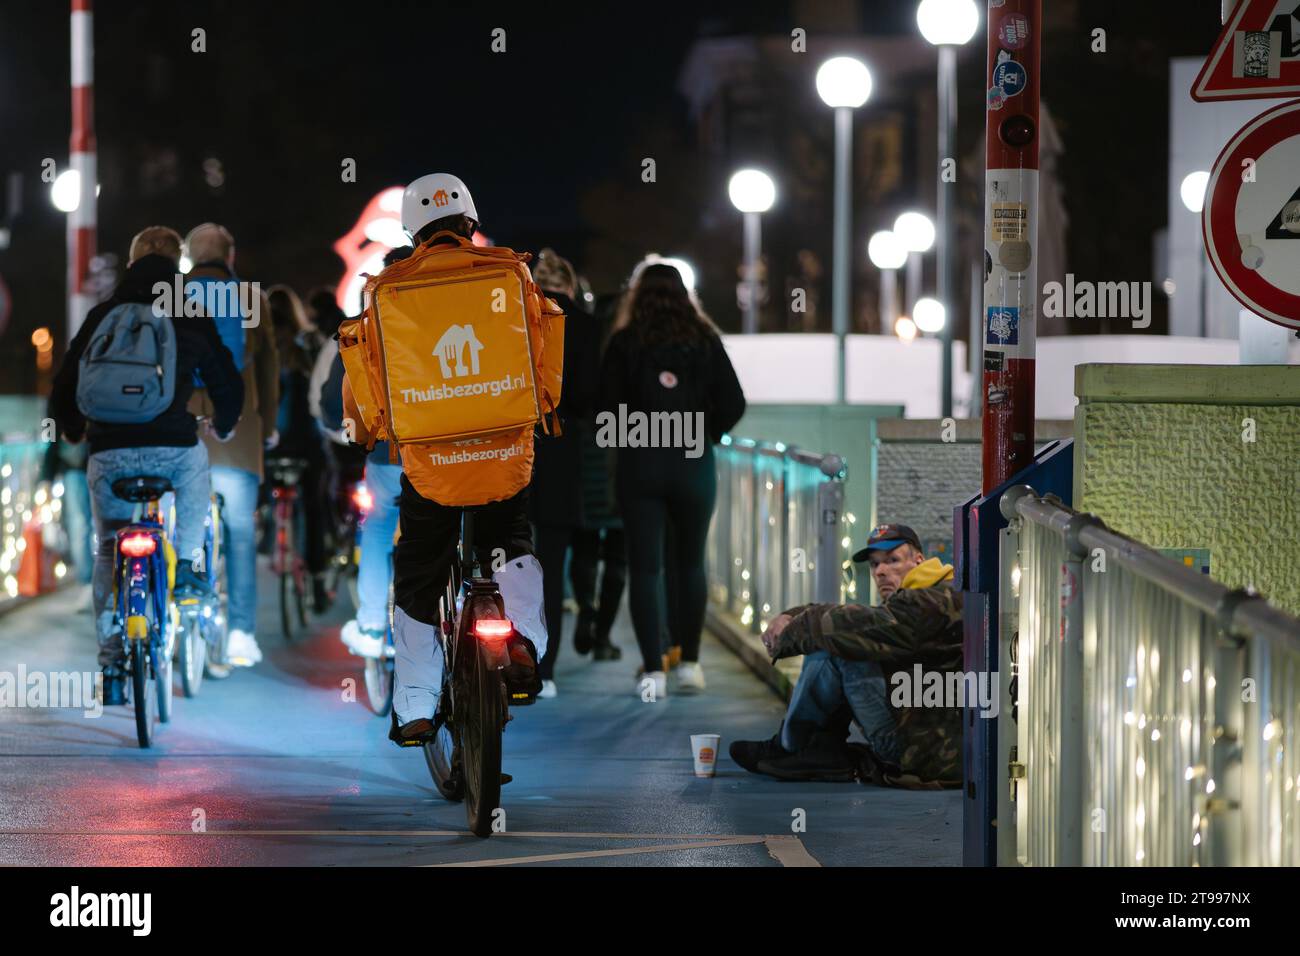 Groningen, Netherlands - 11 17 2023: Flash Delivery Person from Thuisbezorgd on Bicycle in a Big City Driving Past Begging Homeless Man Stock Photo